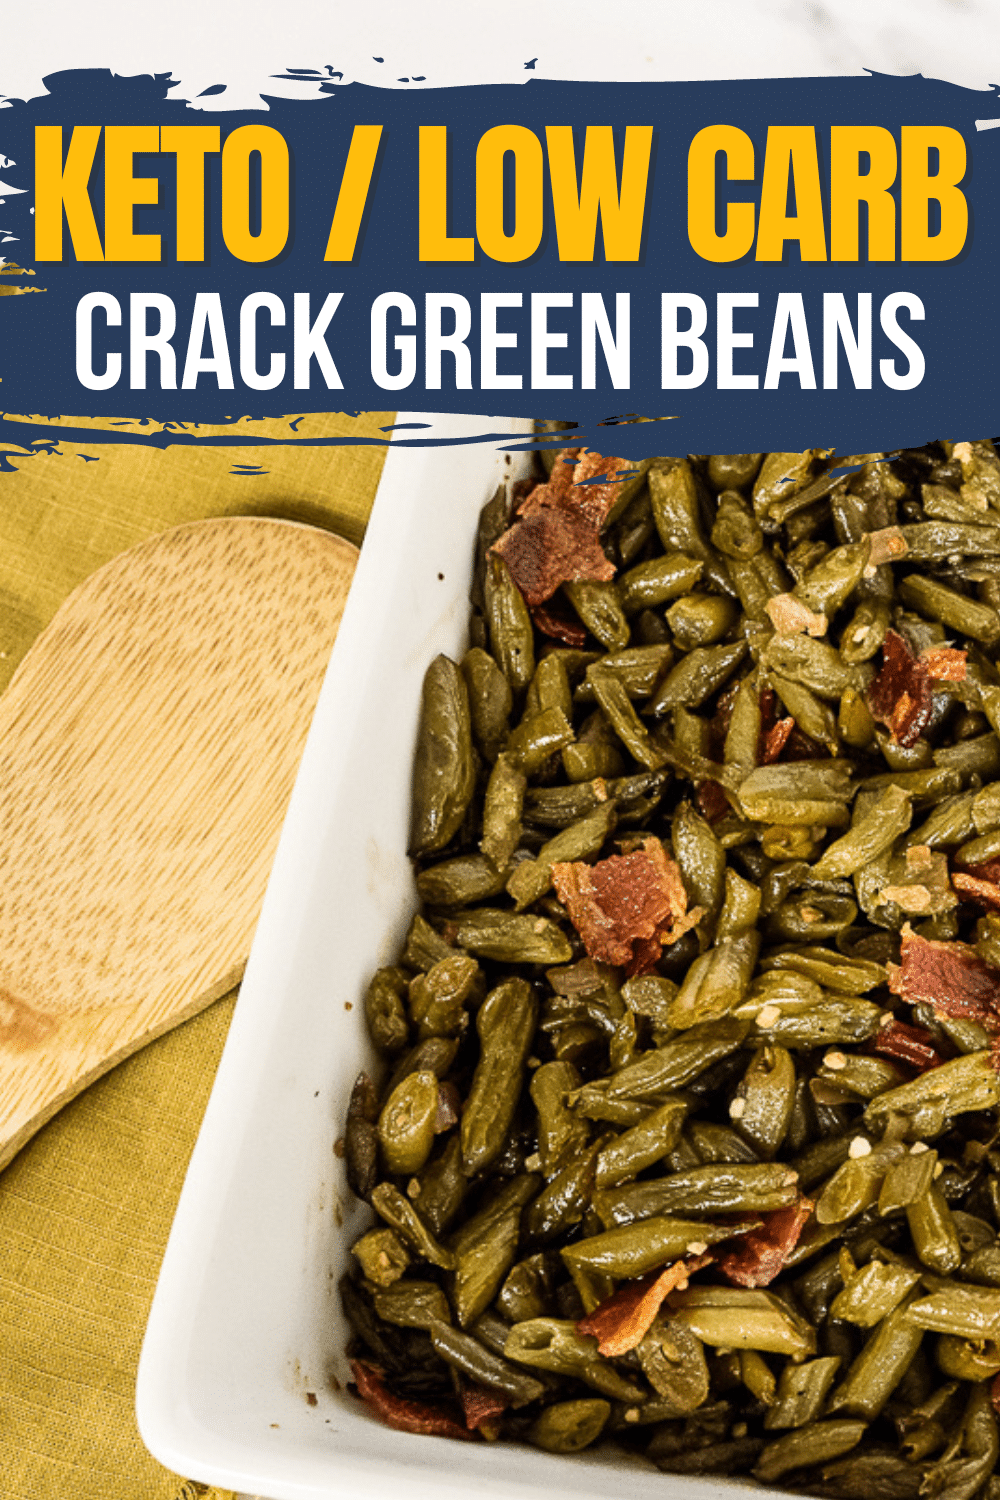 Delicious crack green beans casserole with crispy bacon and a flavorful butter sauce, featured image with a blue banner and yellow and white lettering.